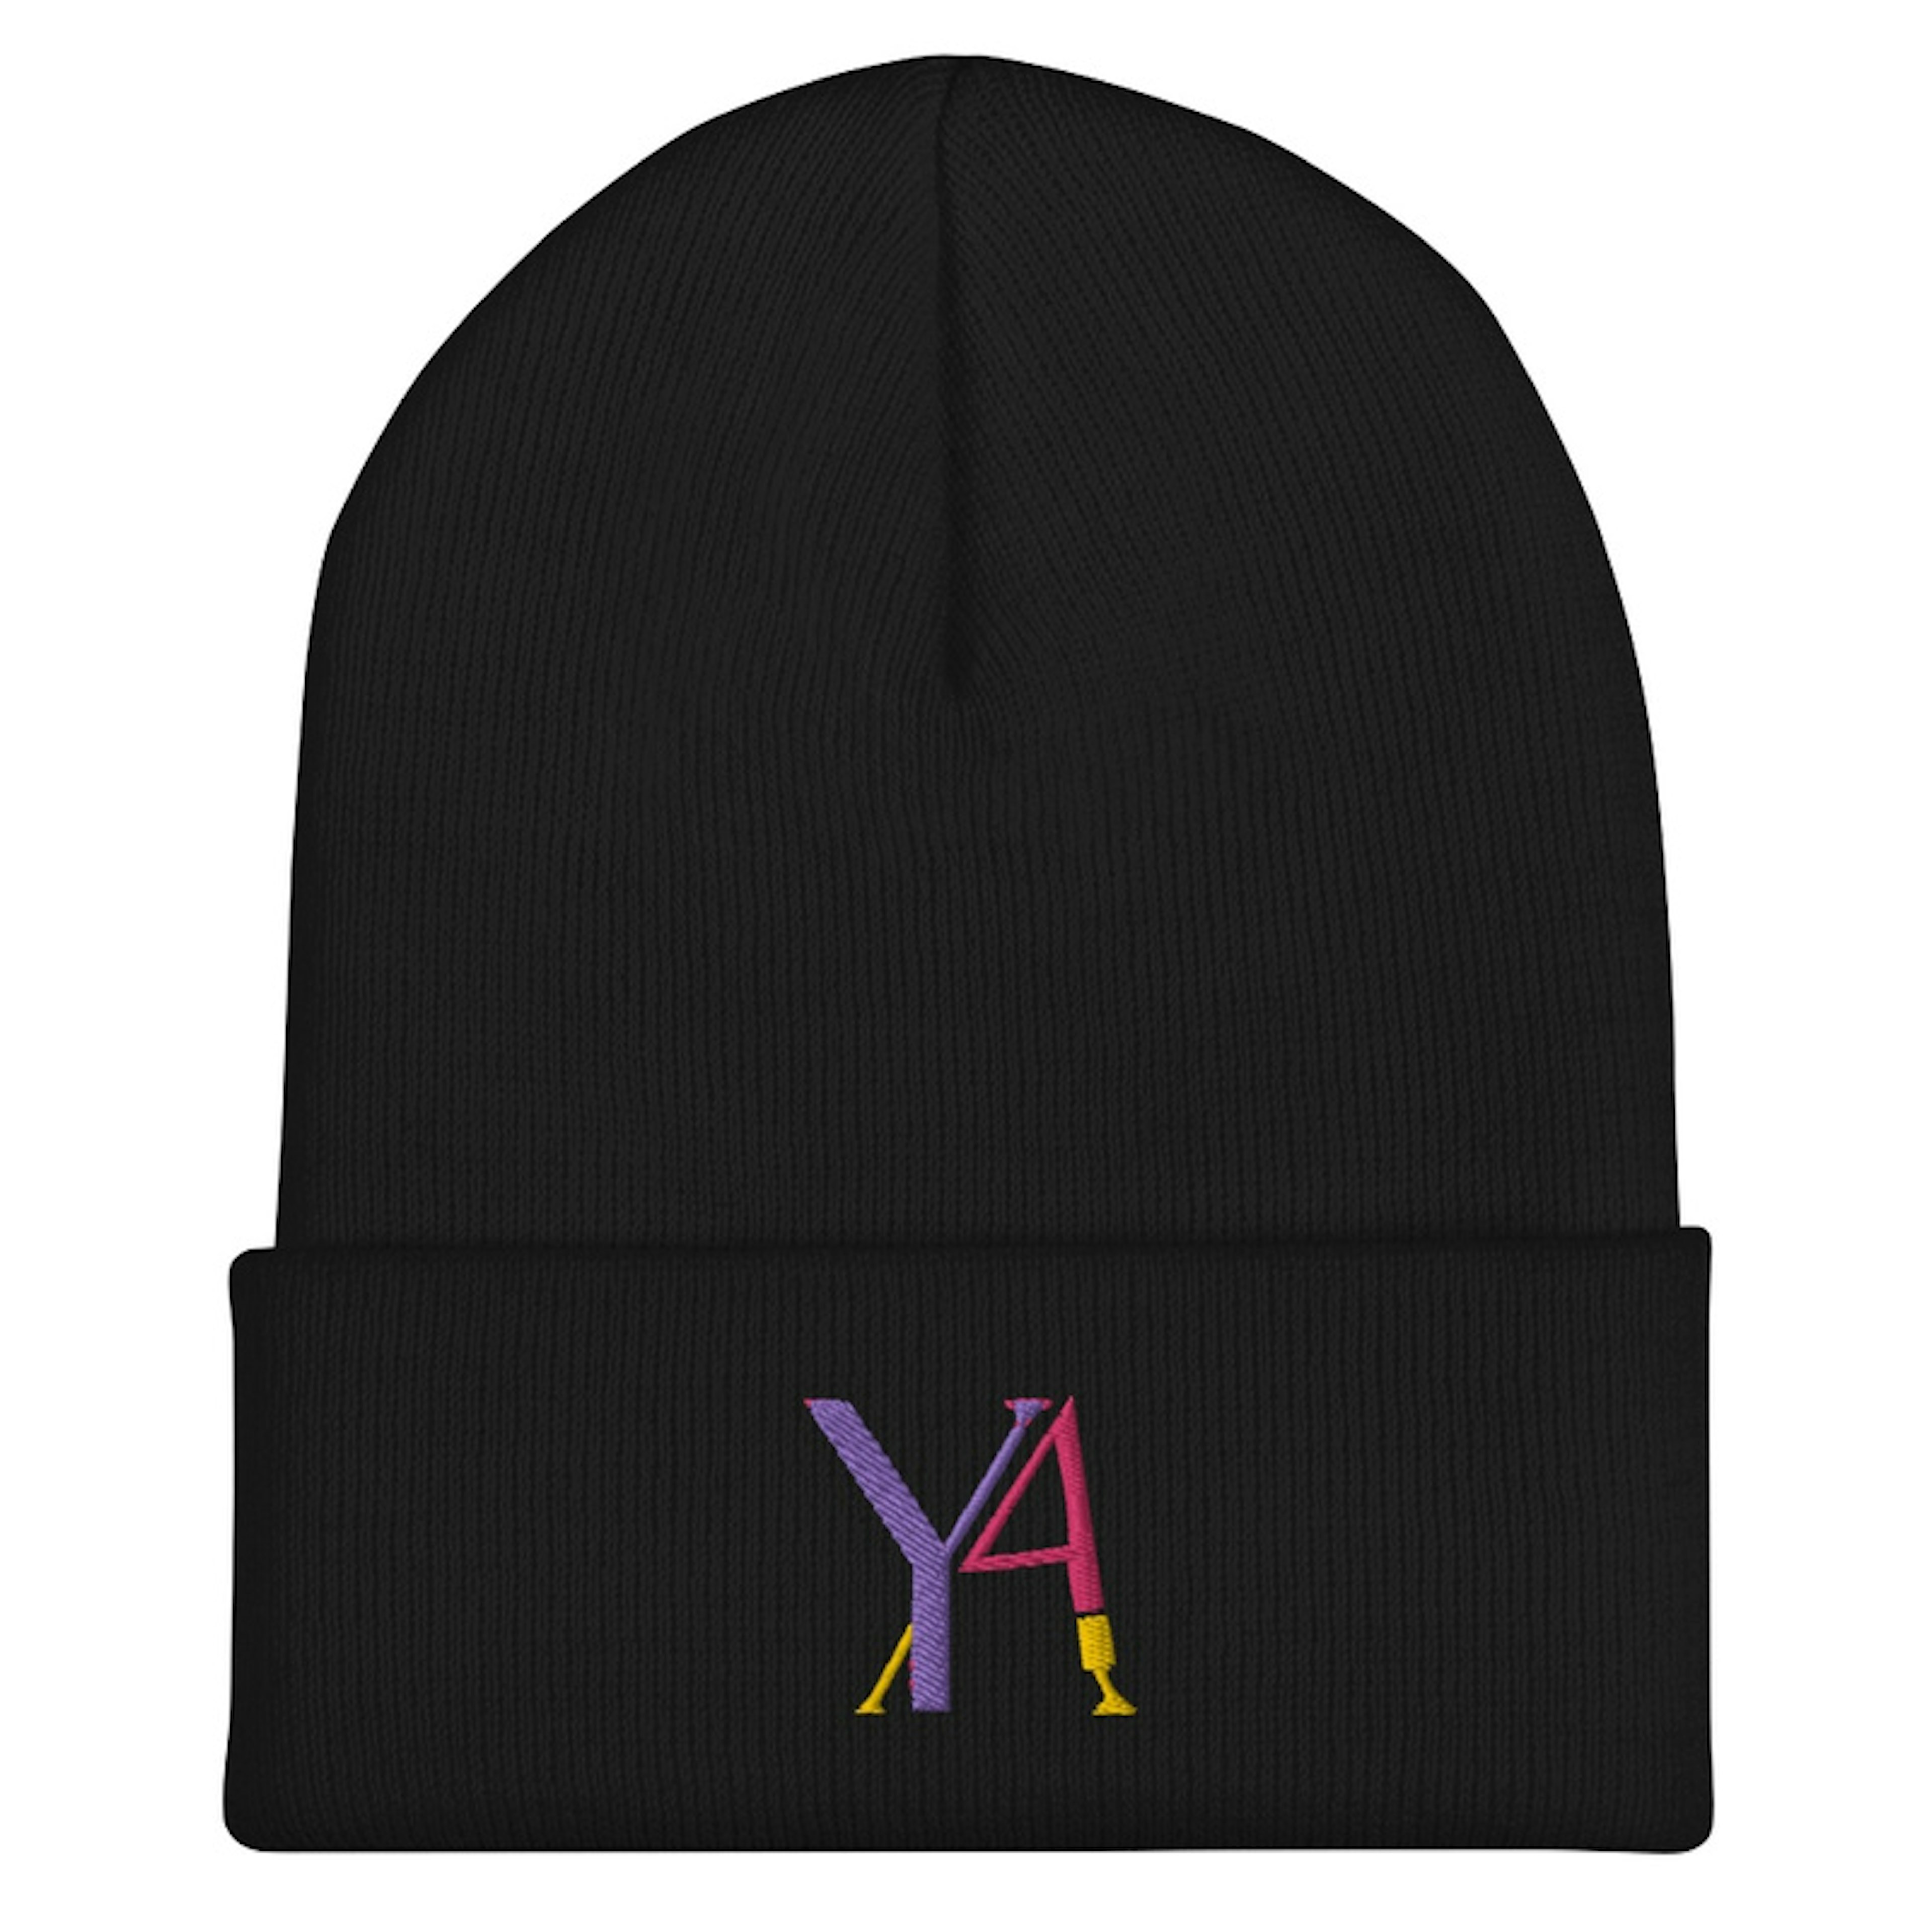 Y4A Logo Embroidered Beanie Hat